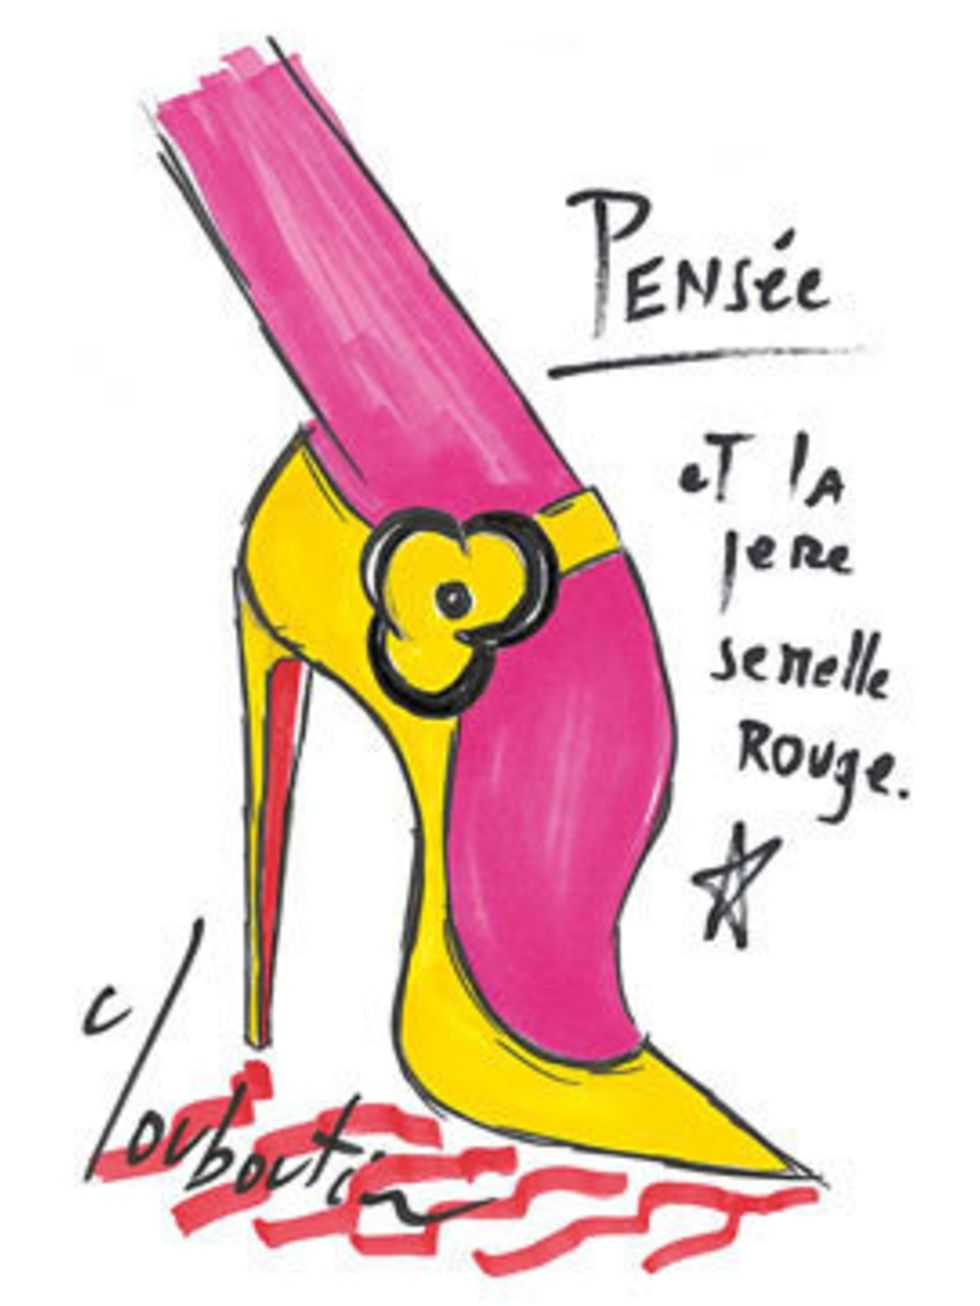 <p>Christian Louboutin's Pensee shoes.</p>